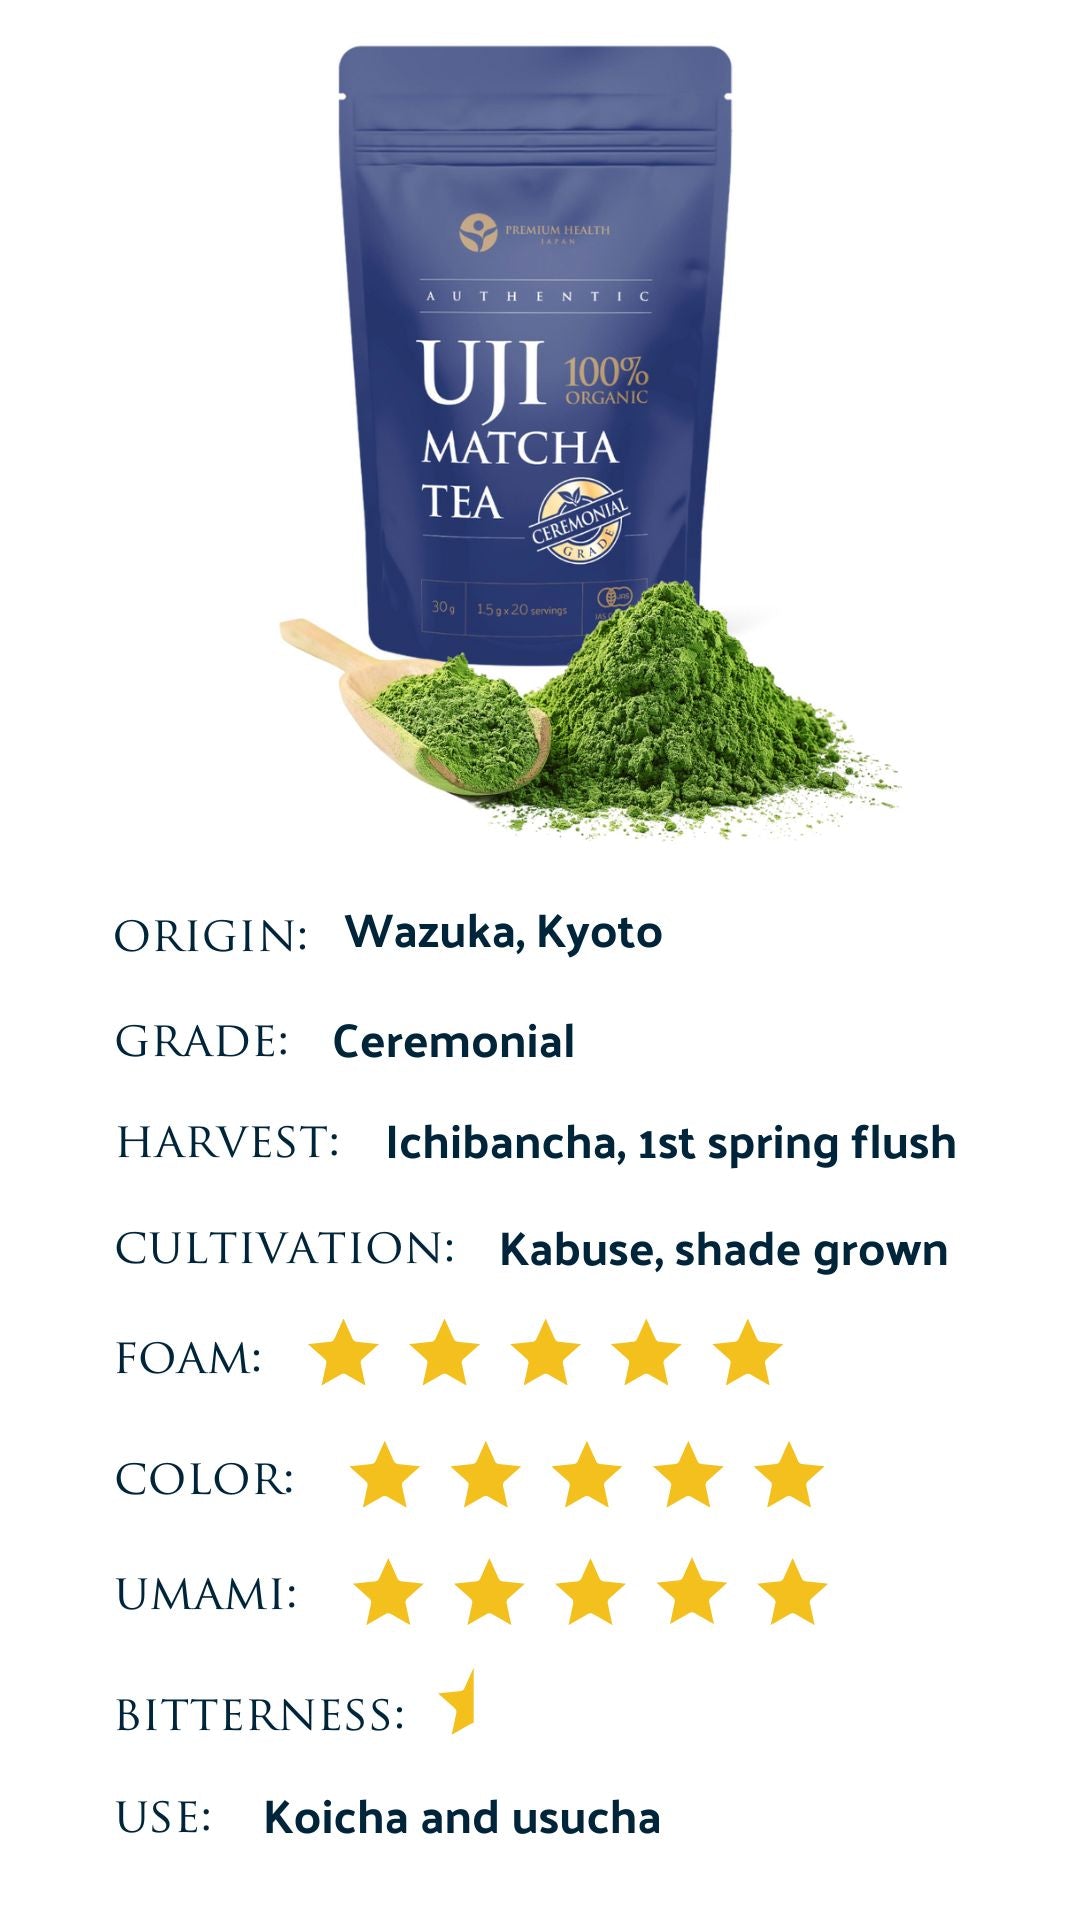 Product profile for our ceremonial grade Uji matcha which rates the product according to various categories